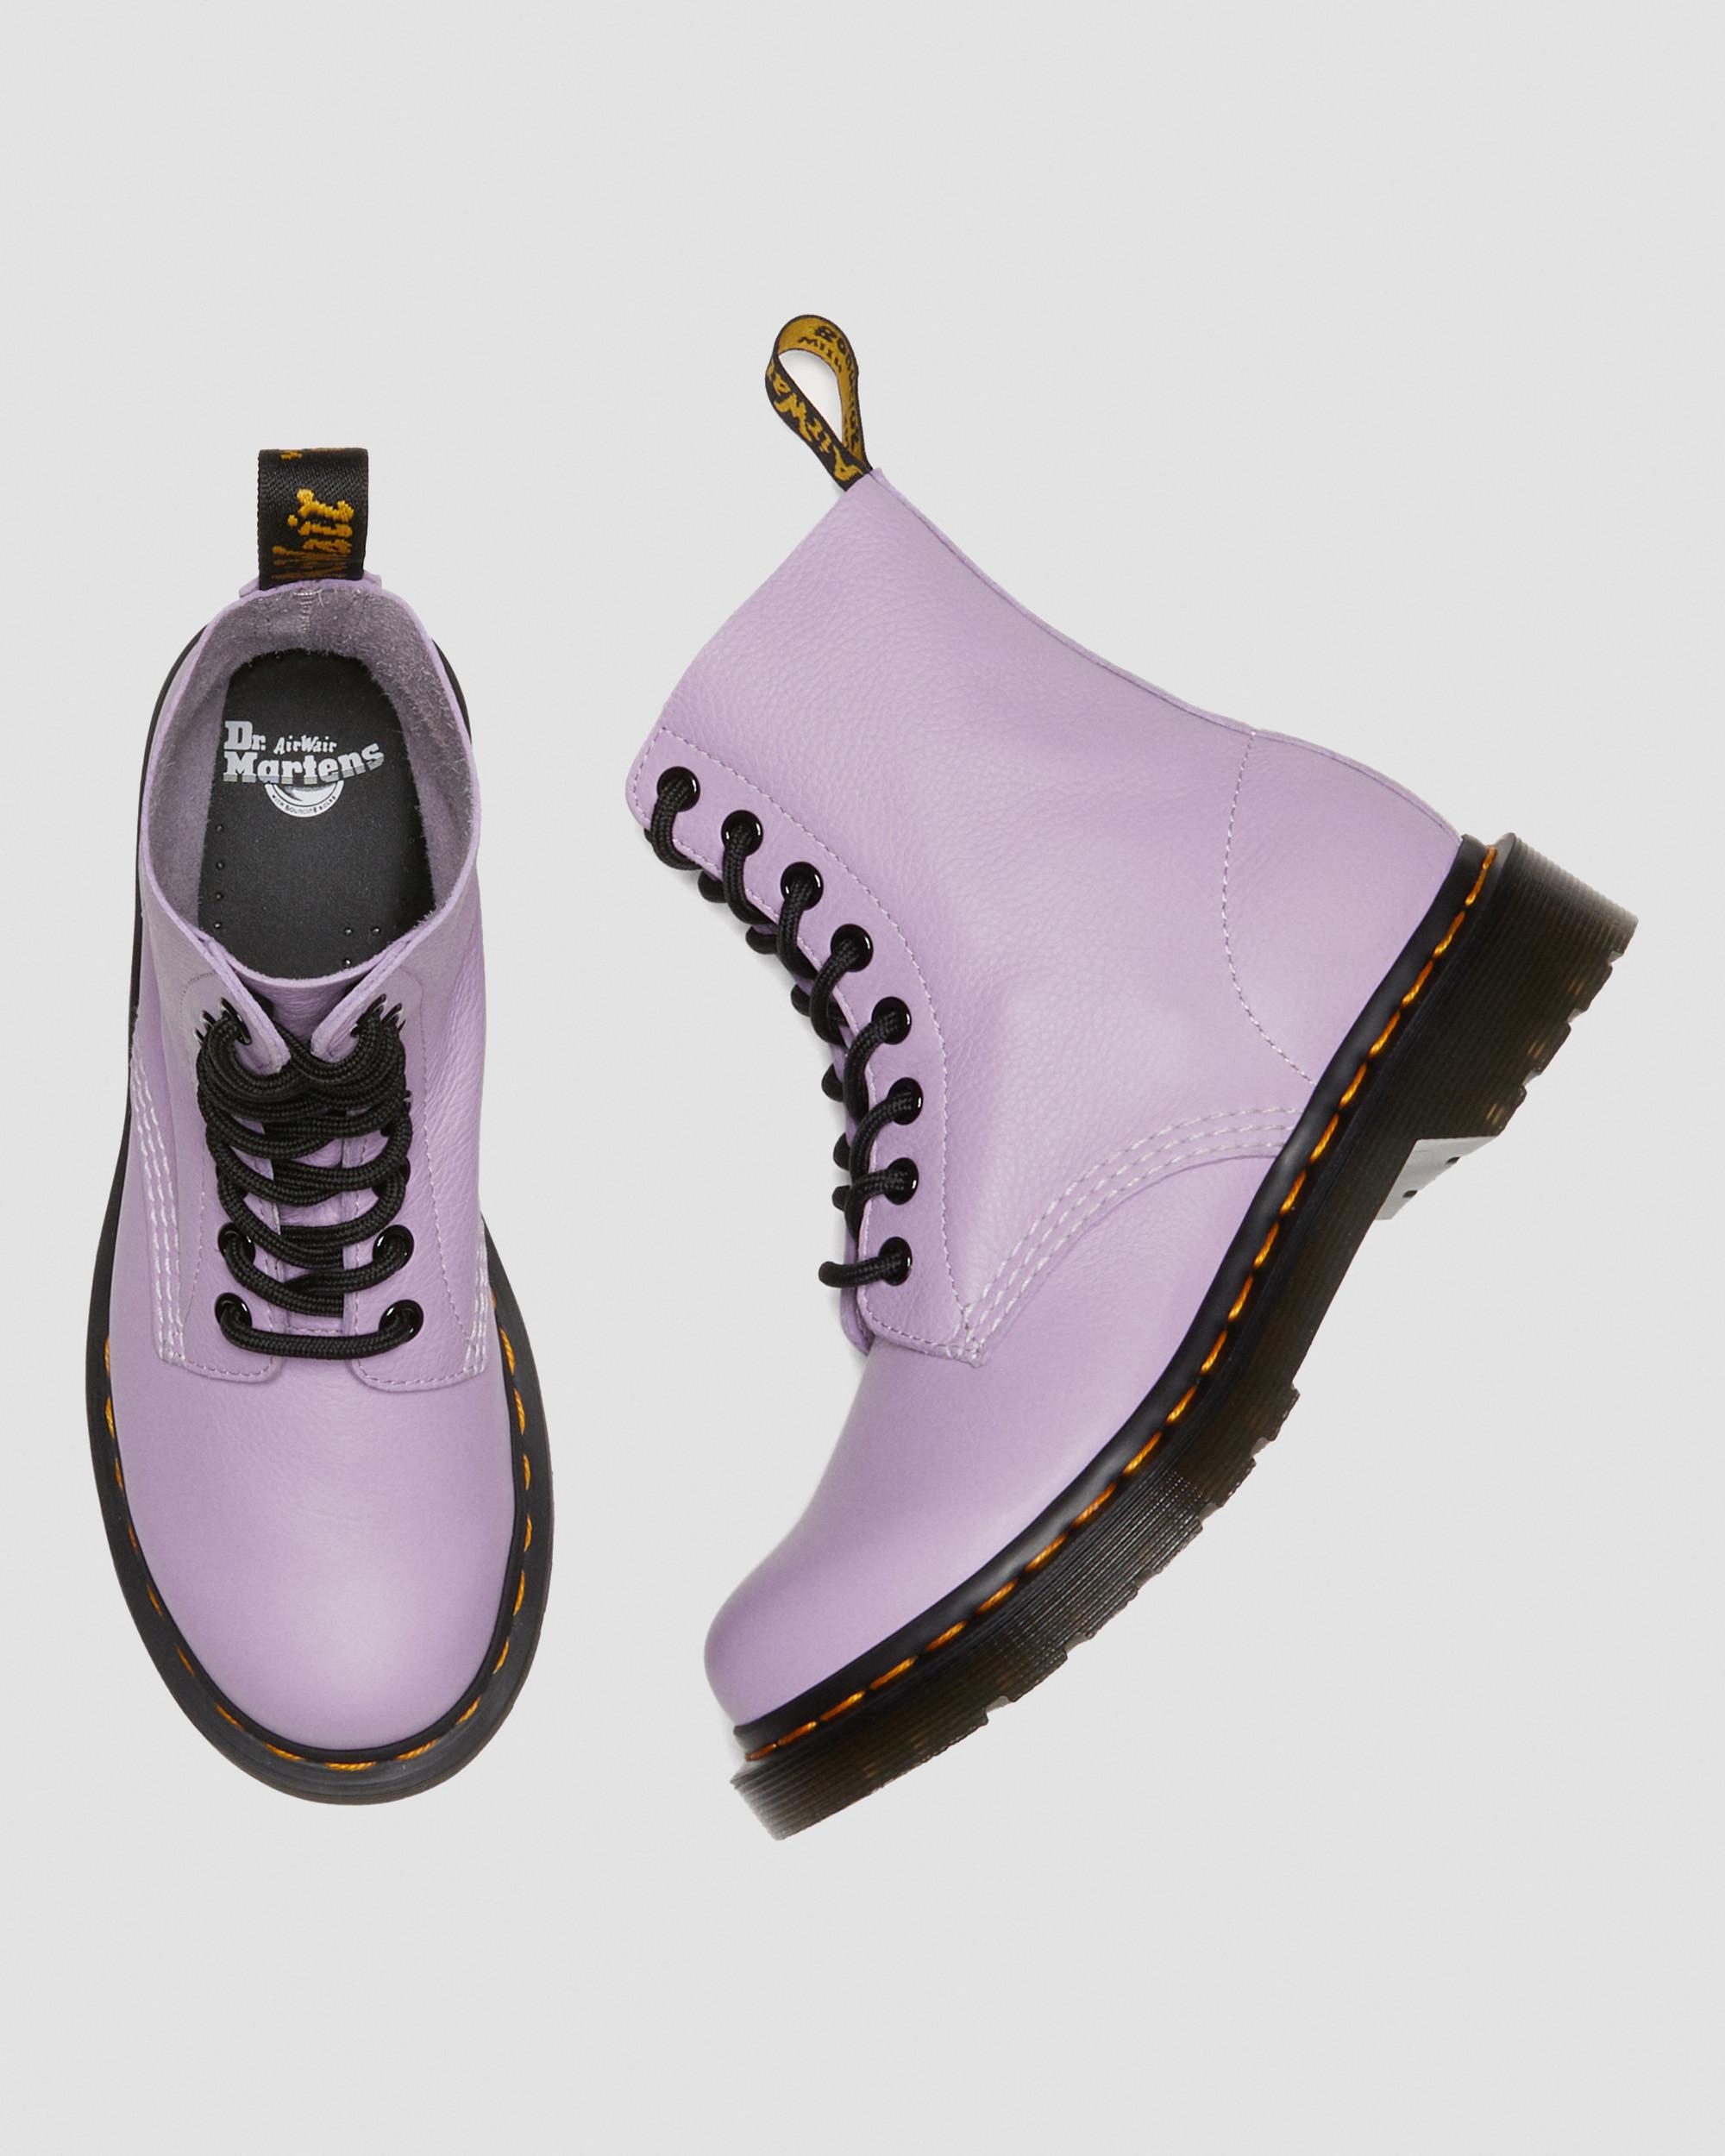 Black Lace Pascal Women\'s Boots | 1460 Up Lilac Eyelet Martens Dr. in